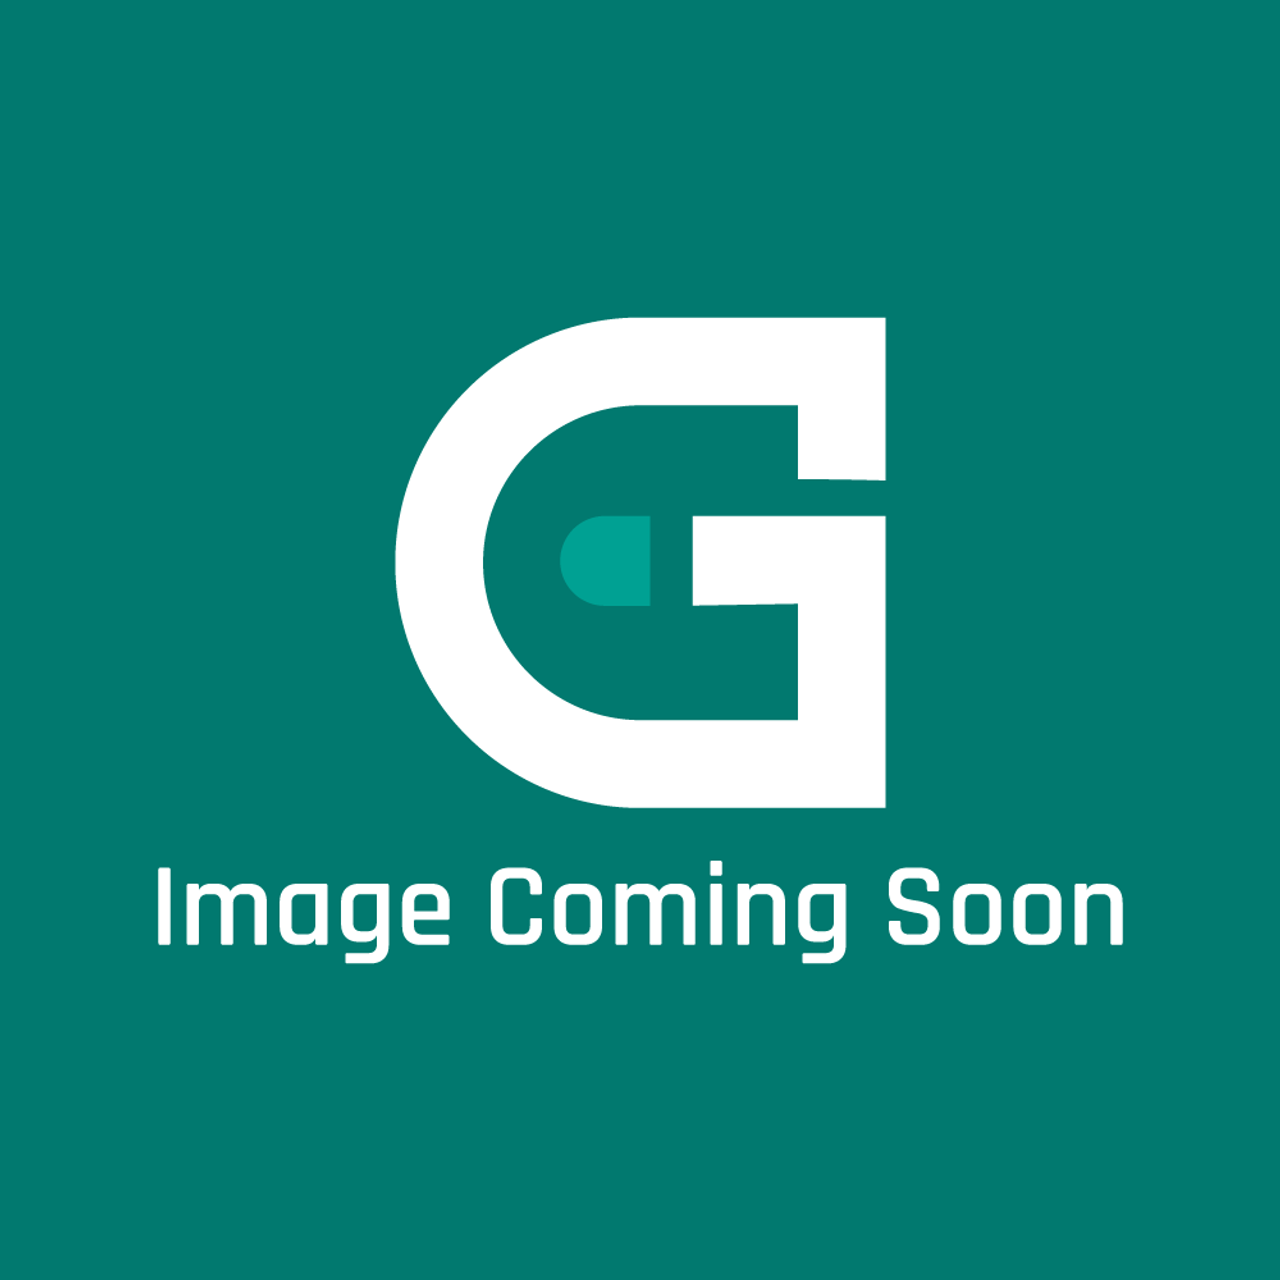 Frigidaire - Electrolux 5304496022 Grate - Image Coming Soon!